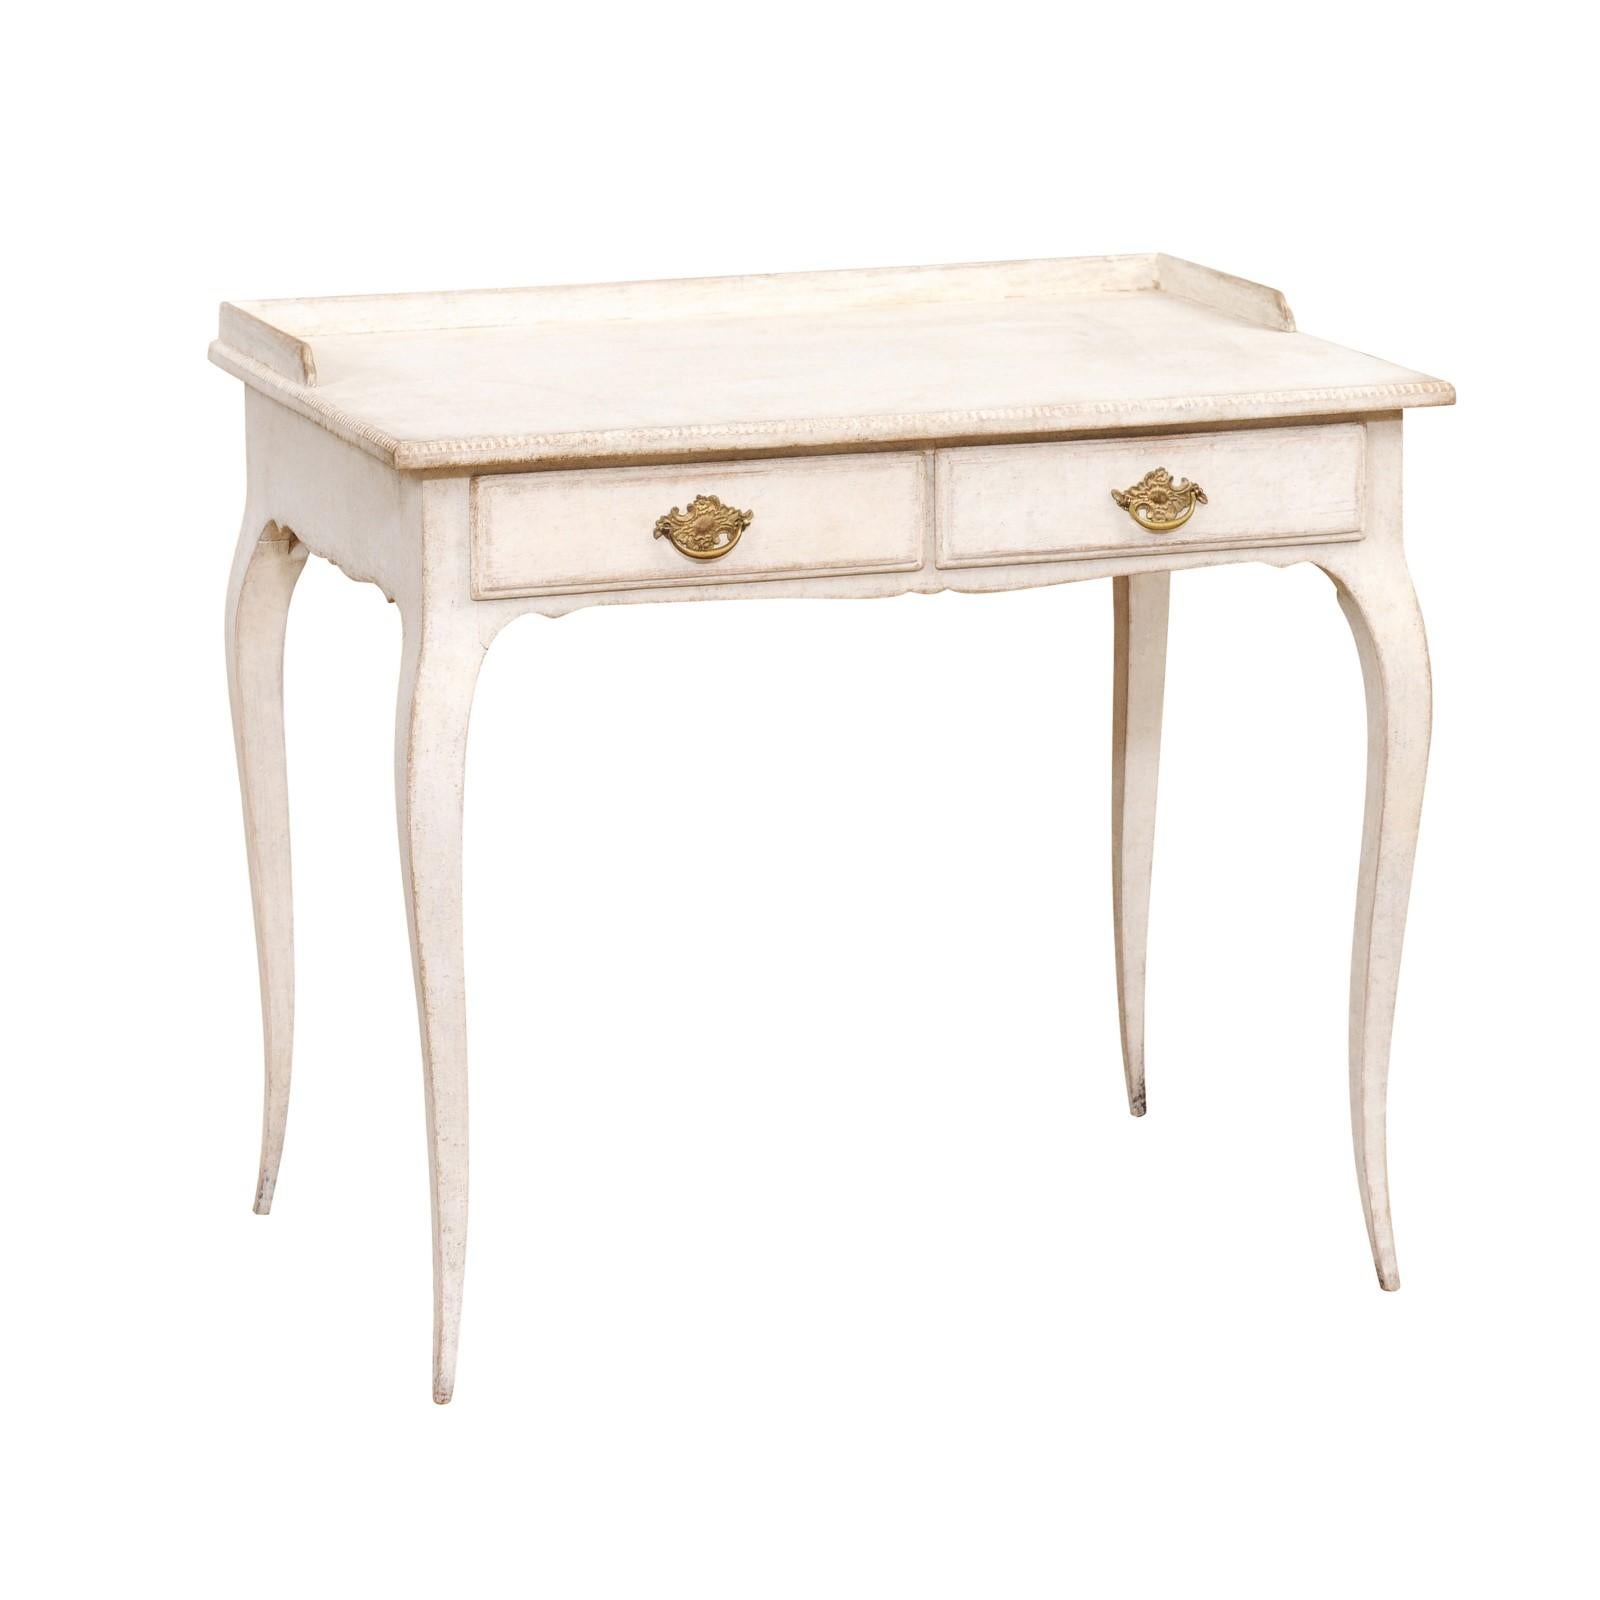 A Swedish Rococo style off white painted desk from circa 1880 with two drawers, cabriole legs and bronze hardware. This Swedish Rococo style desk, dating back to approximately 1880, exudes timeless elegance with its soft off-white/very light gray